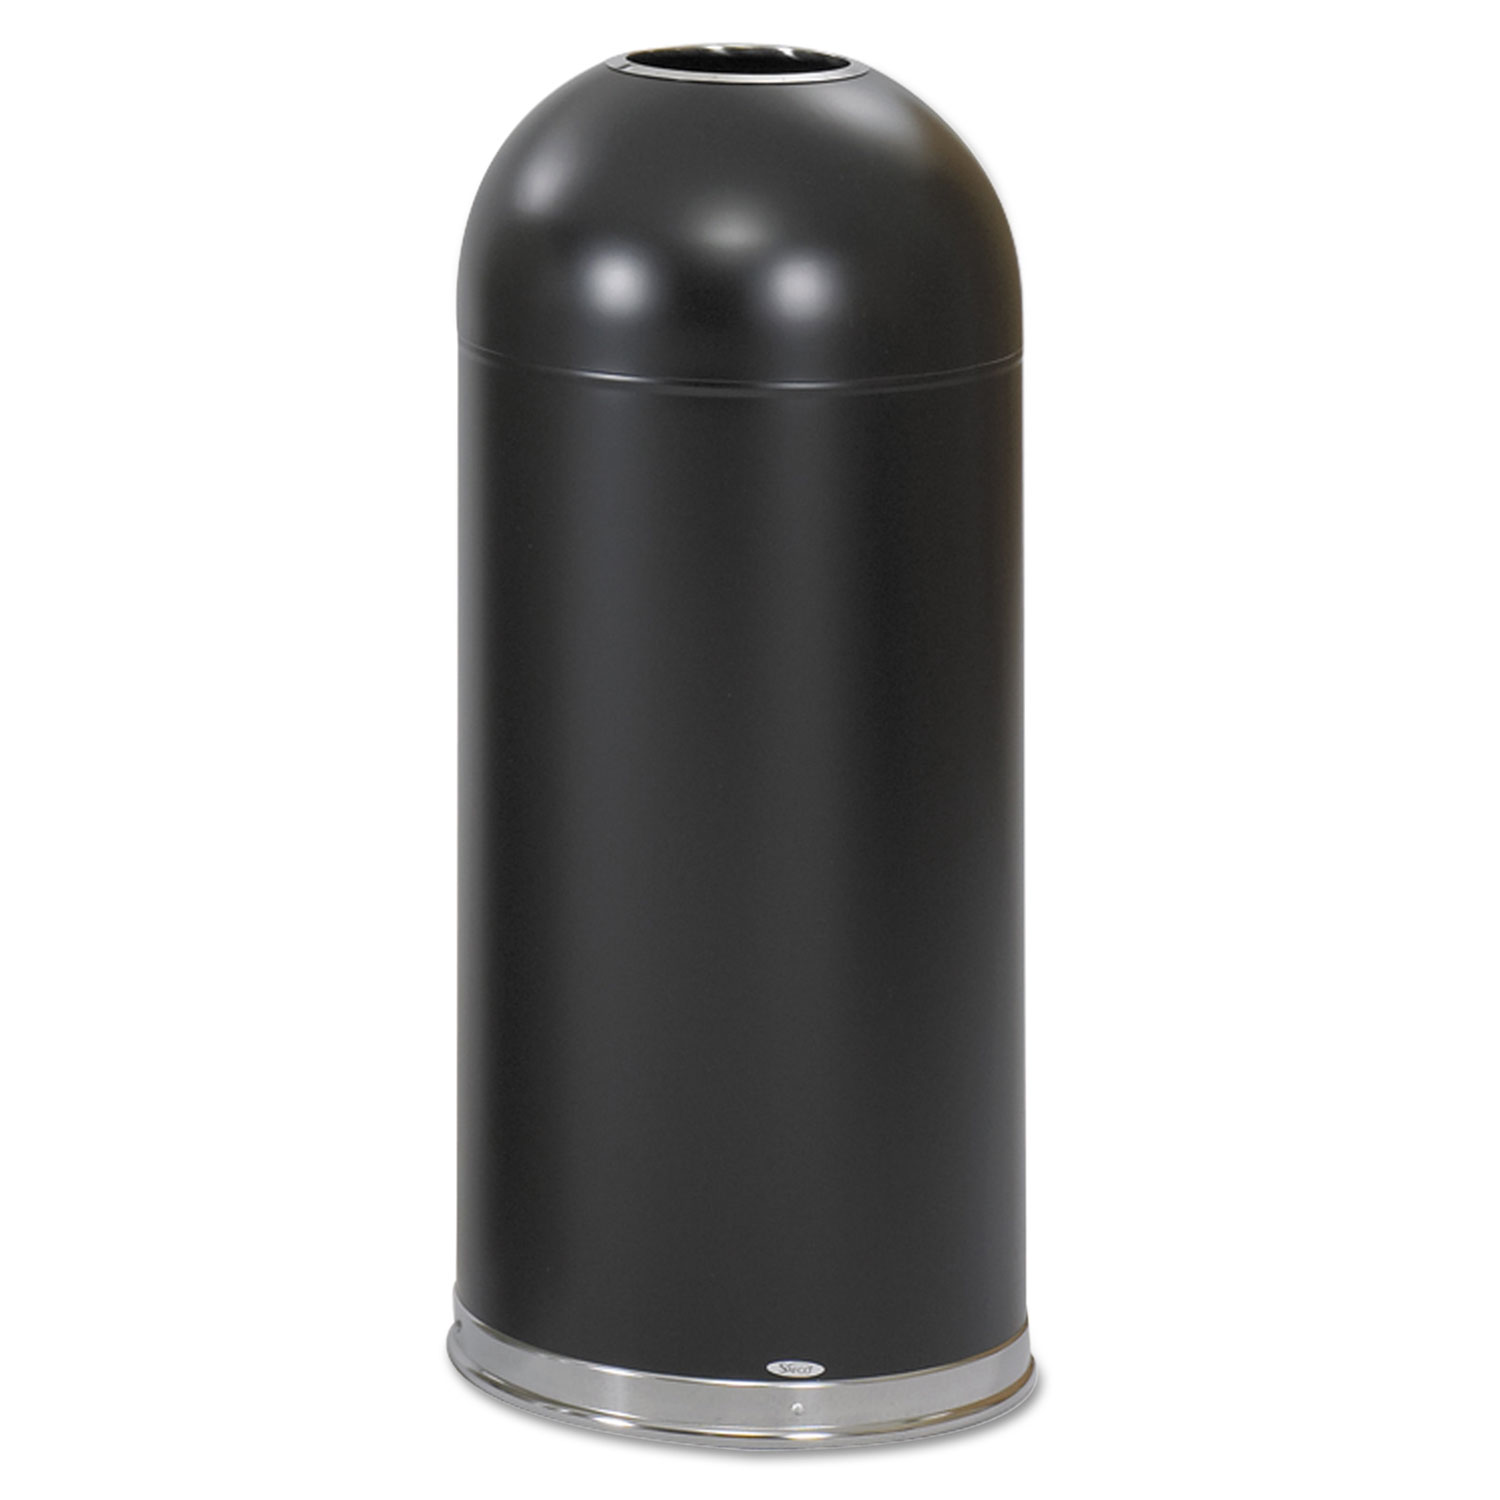  Safco 9639BL Open-Top Dome Receptacle, Round, Steel, 15 gal, Black (SAF9639BL) 